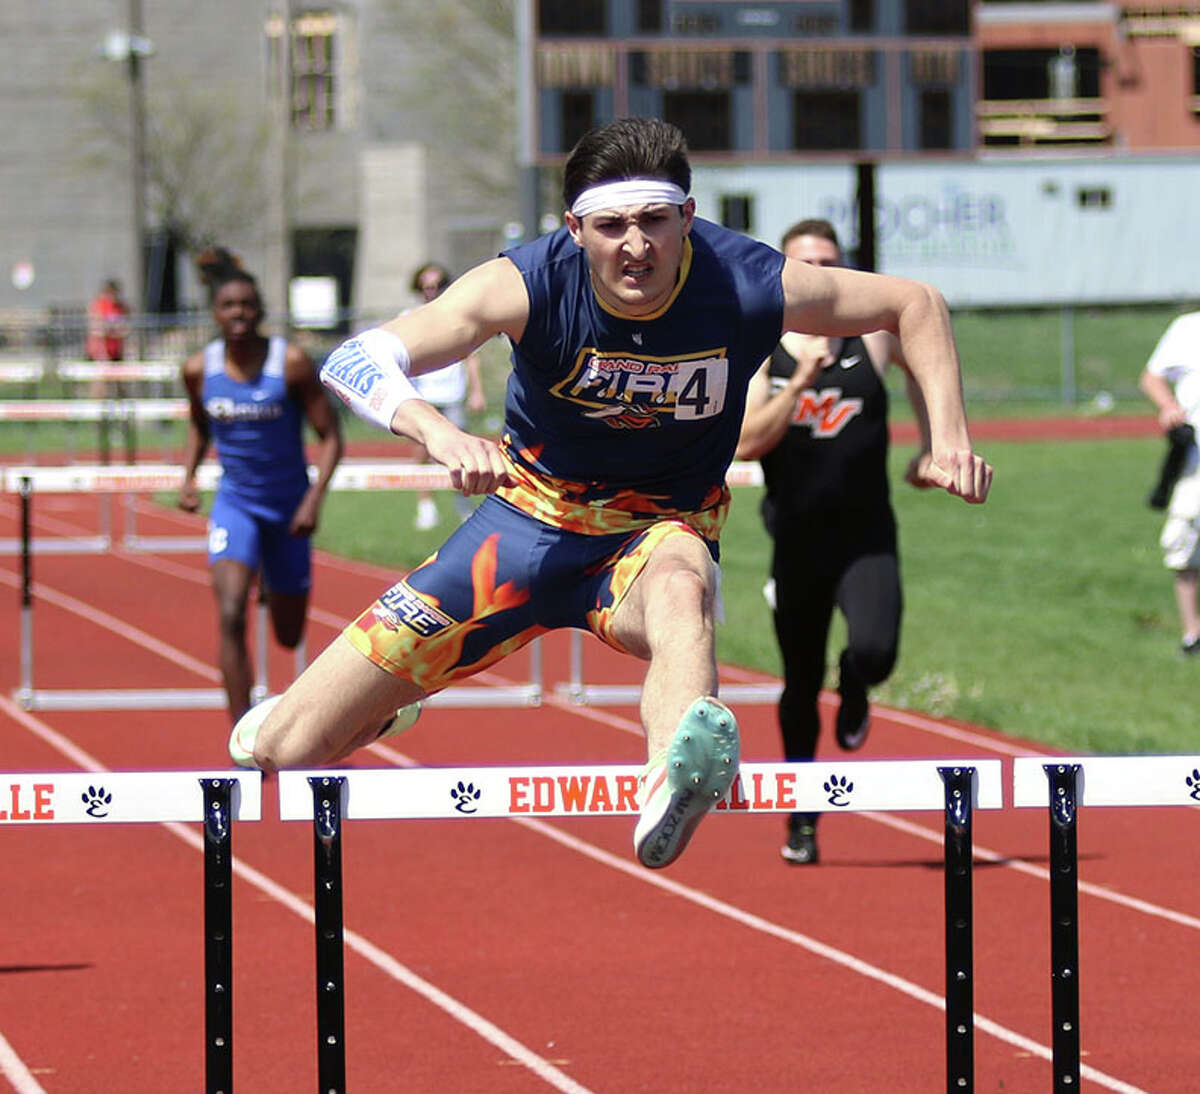 Benny Diaz clears a hurdle late in his victory in the 300-meter hurdles on Saturday at the Winston Brown Invite in Edwardsville,